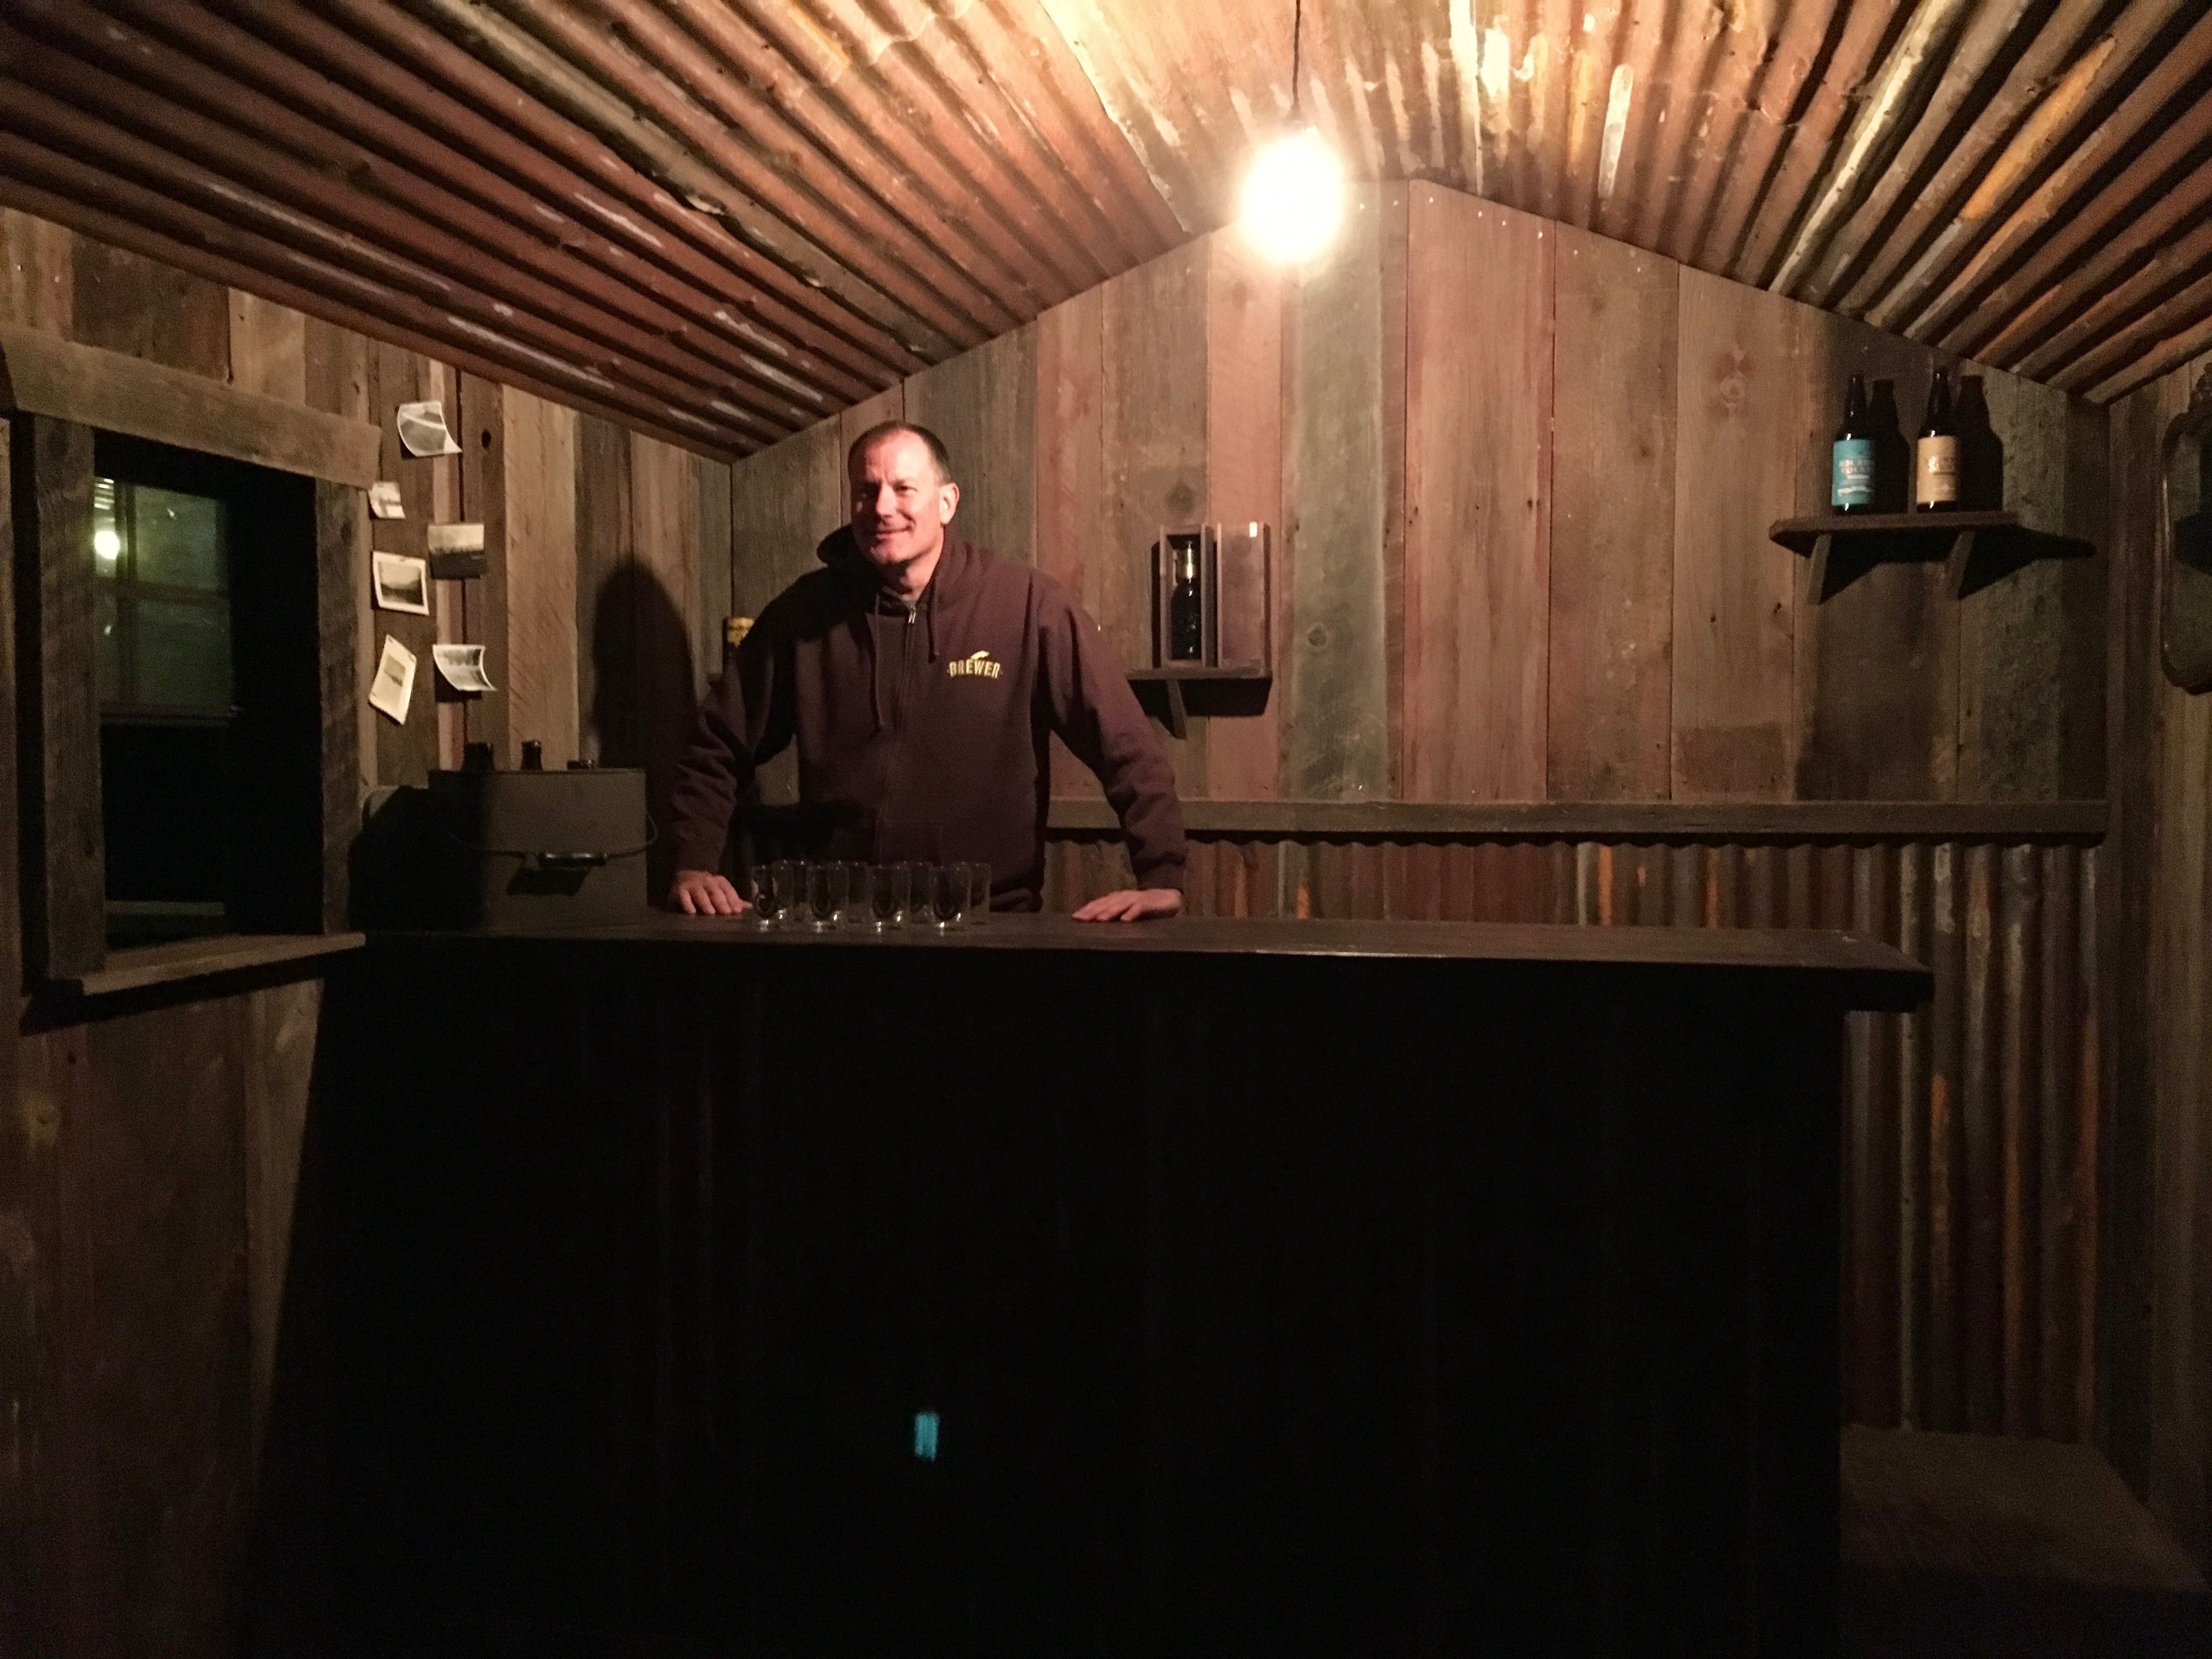 Goose Island's Mark Kamarauskas ready to serve Bourbon County Rare among other barrel aged treats at a remote pop-up bar at Elk Mountain Farms.